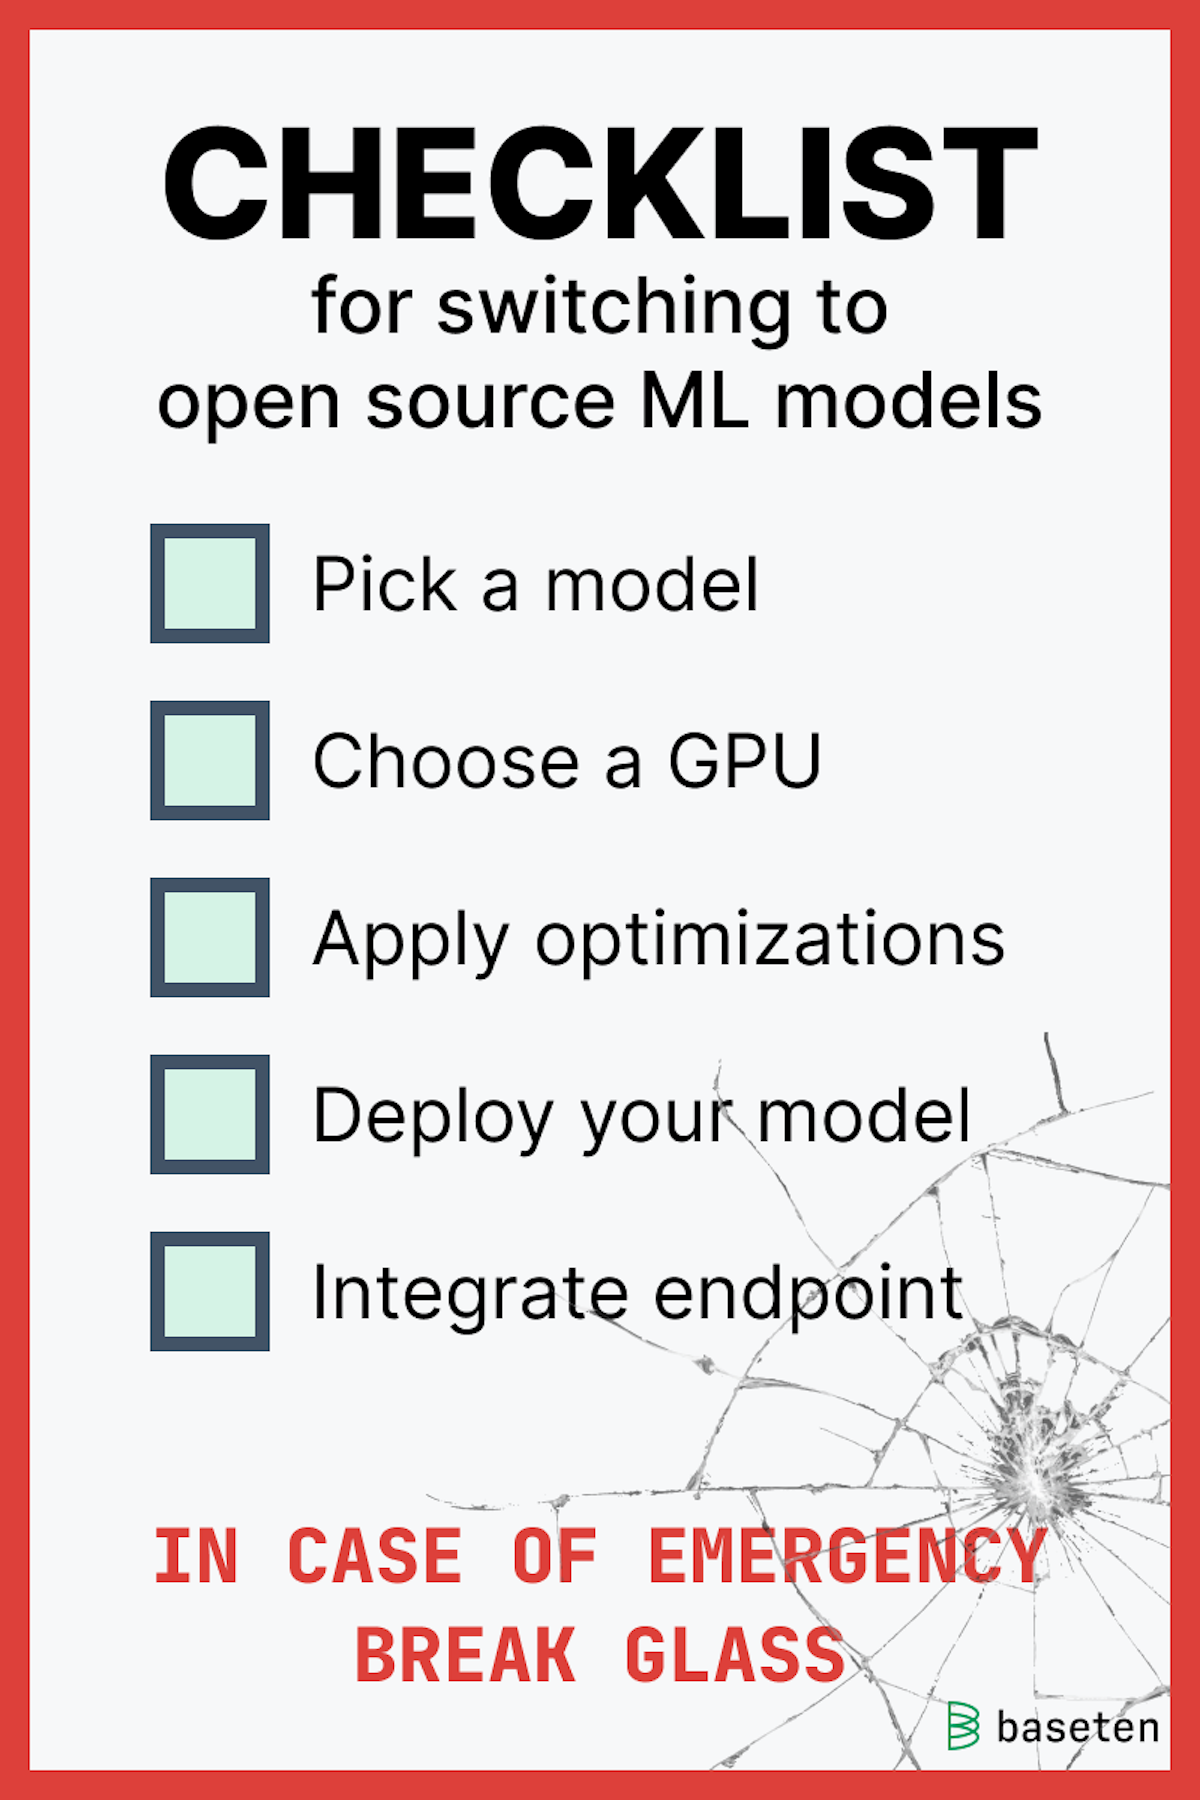 Checklist for switching to open source ML models